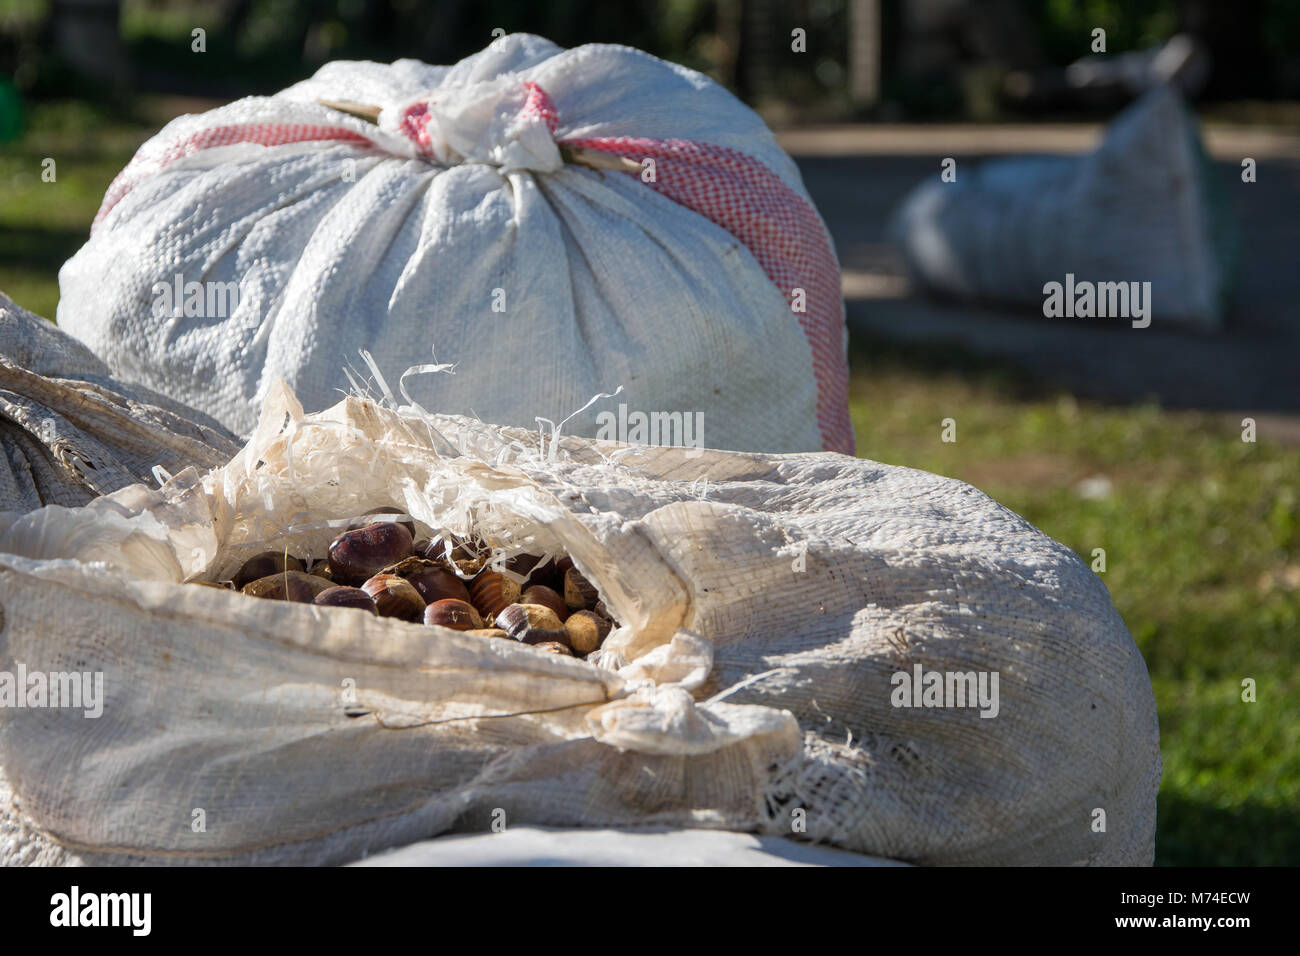 Hemp sacks full of harvest chestnuts accumulated on the ground. Agriculture, business concept Stock Photo